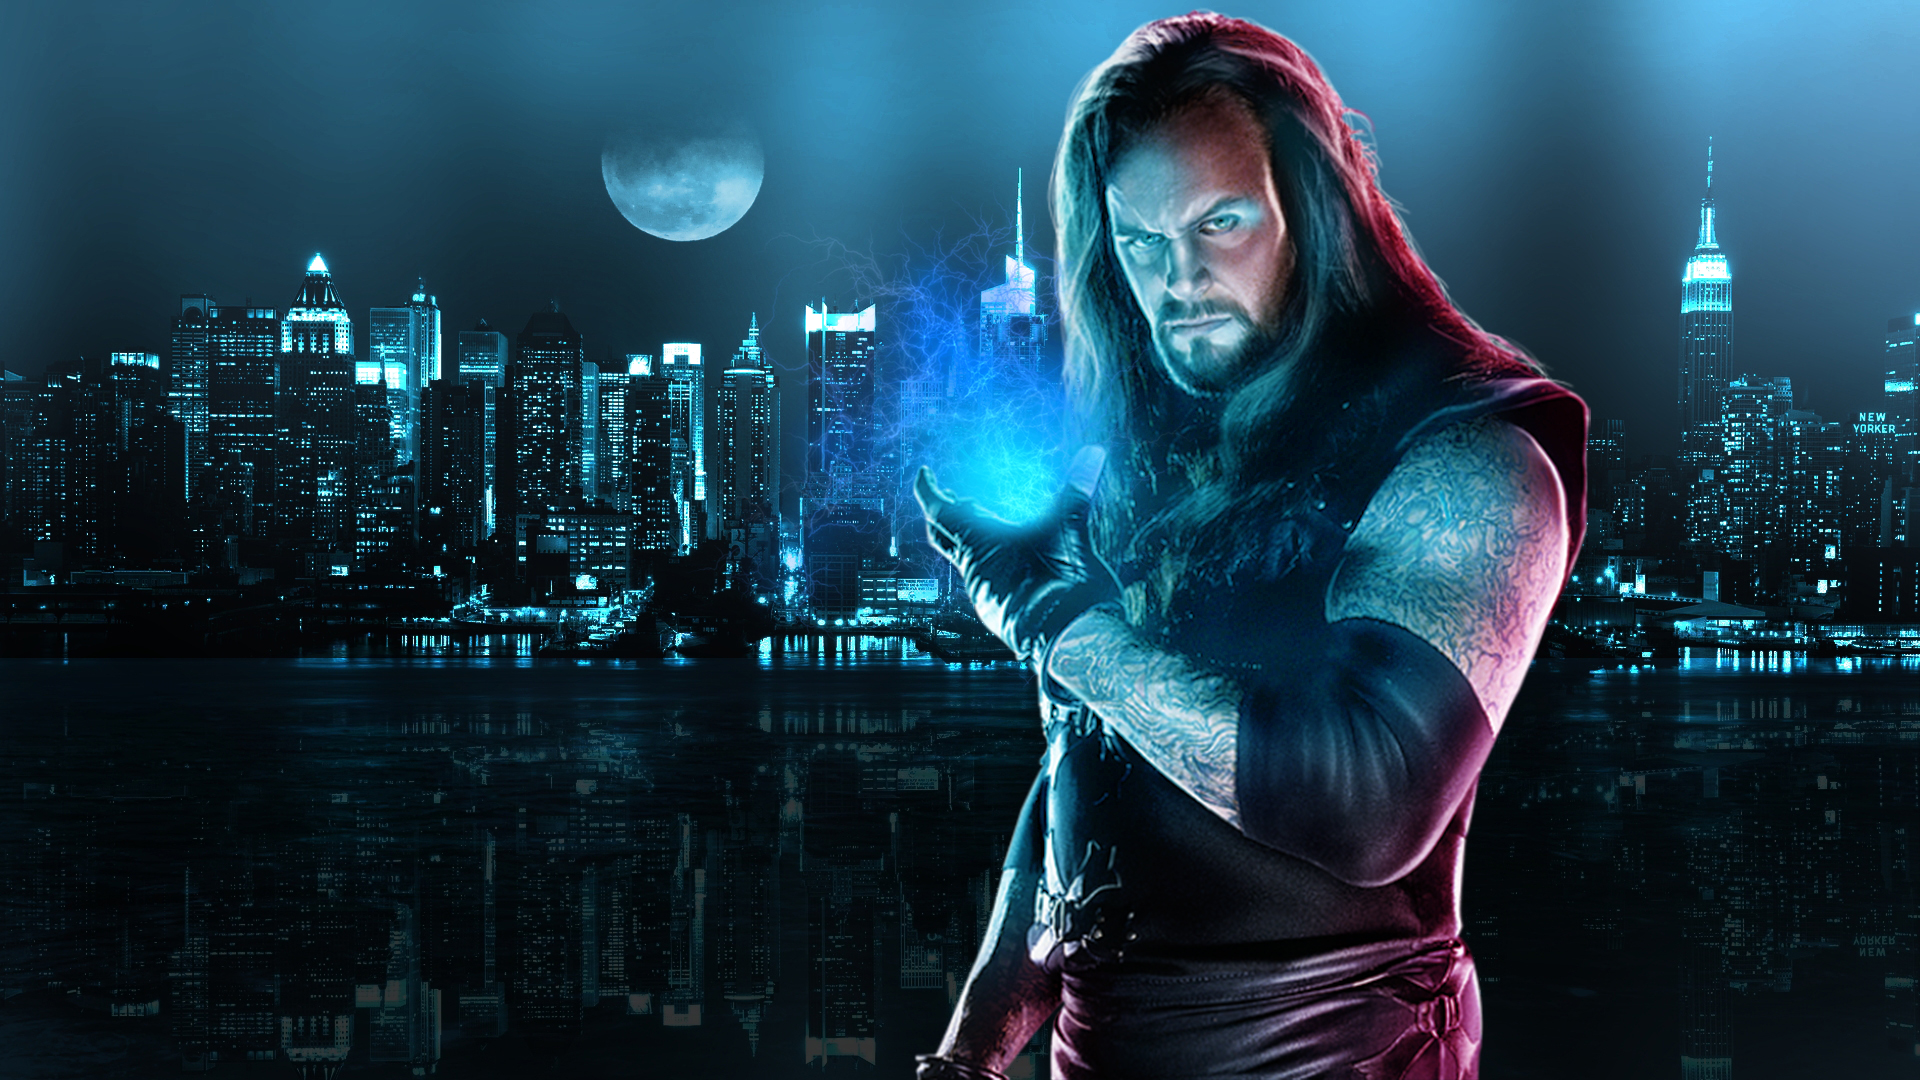 wallpapers de wwe,fictional character,cg artwork,photography,movie,darkness